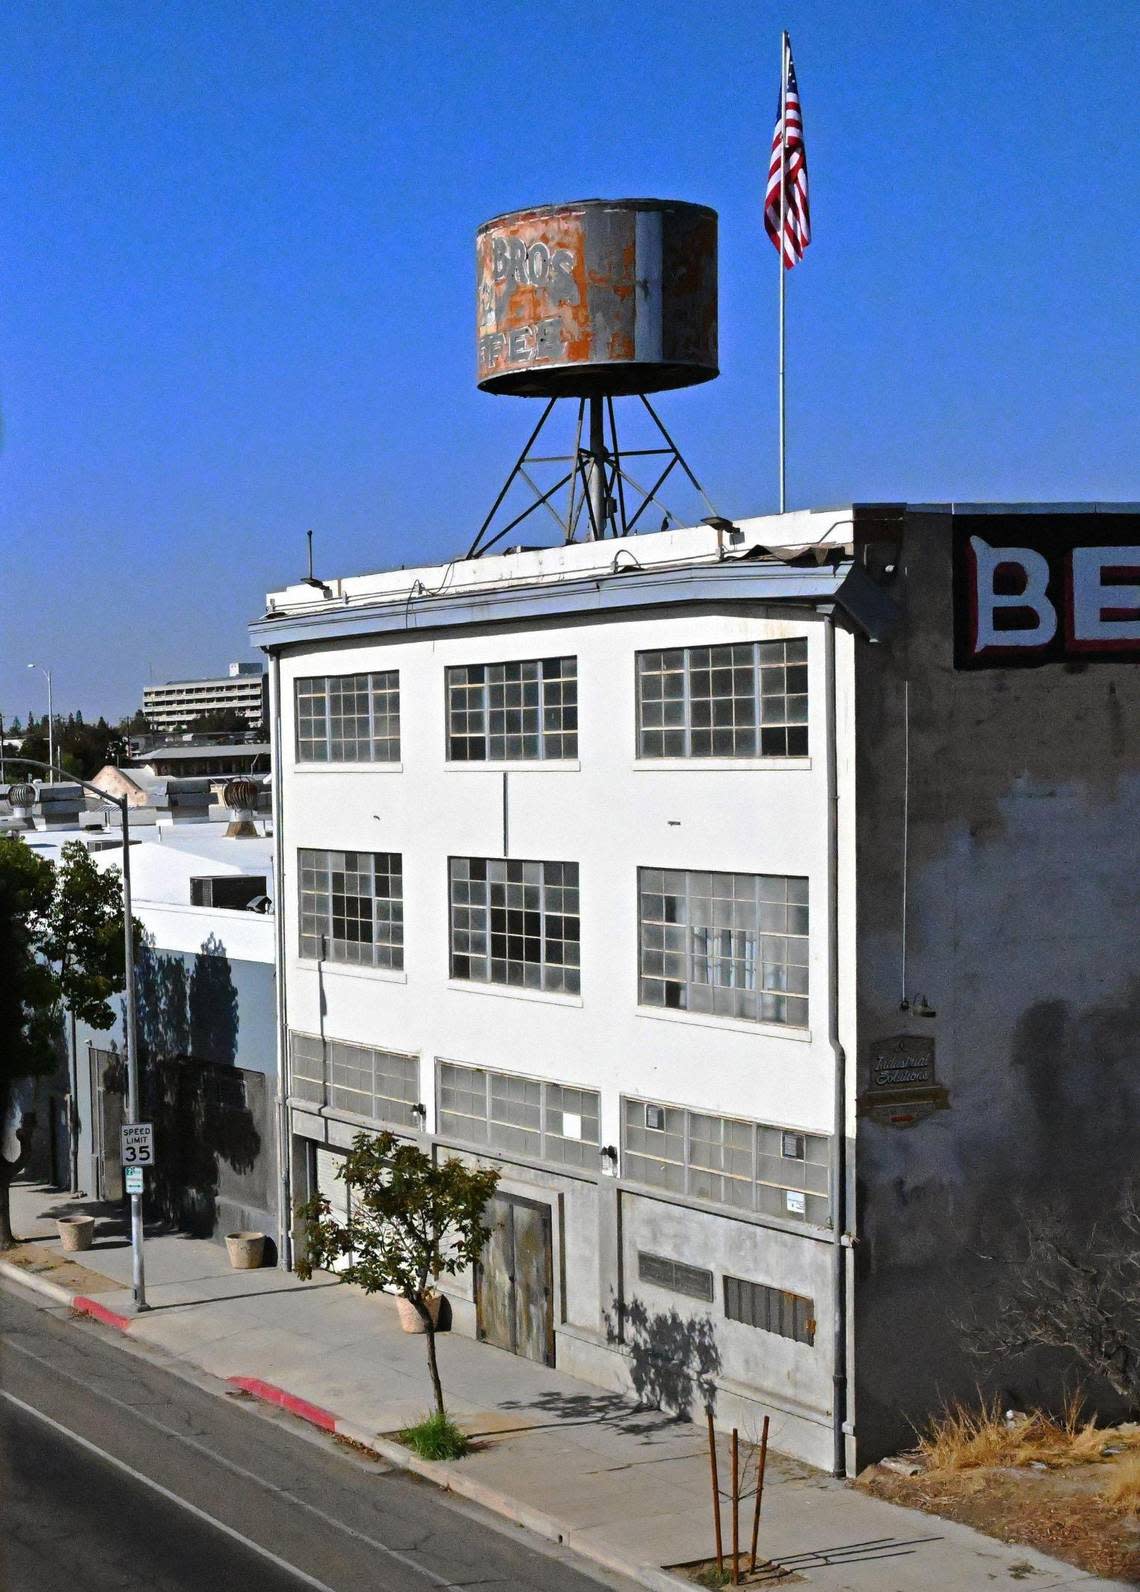 The historical Dale Bros. Coffee landmark, seen perched on top of a building on H Street, is slated to be removed. Photographed Tuesday, Oct. 3, 2023 in Fresno.